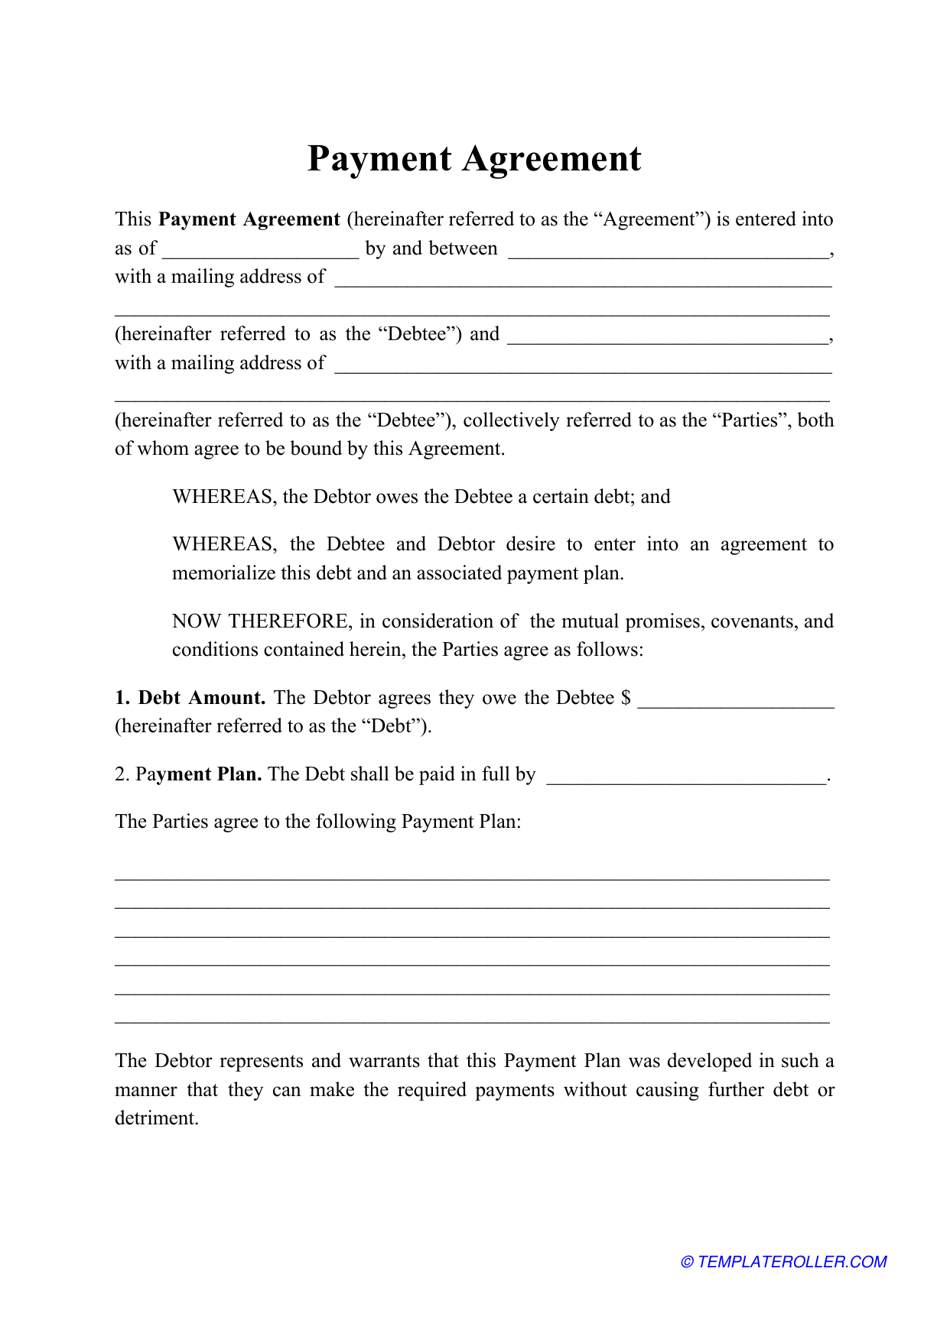 Payment Agreement Template Download Printable PDF  Templateroller With installment payment agreement template free